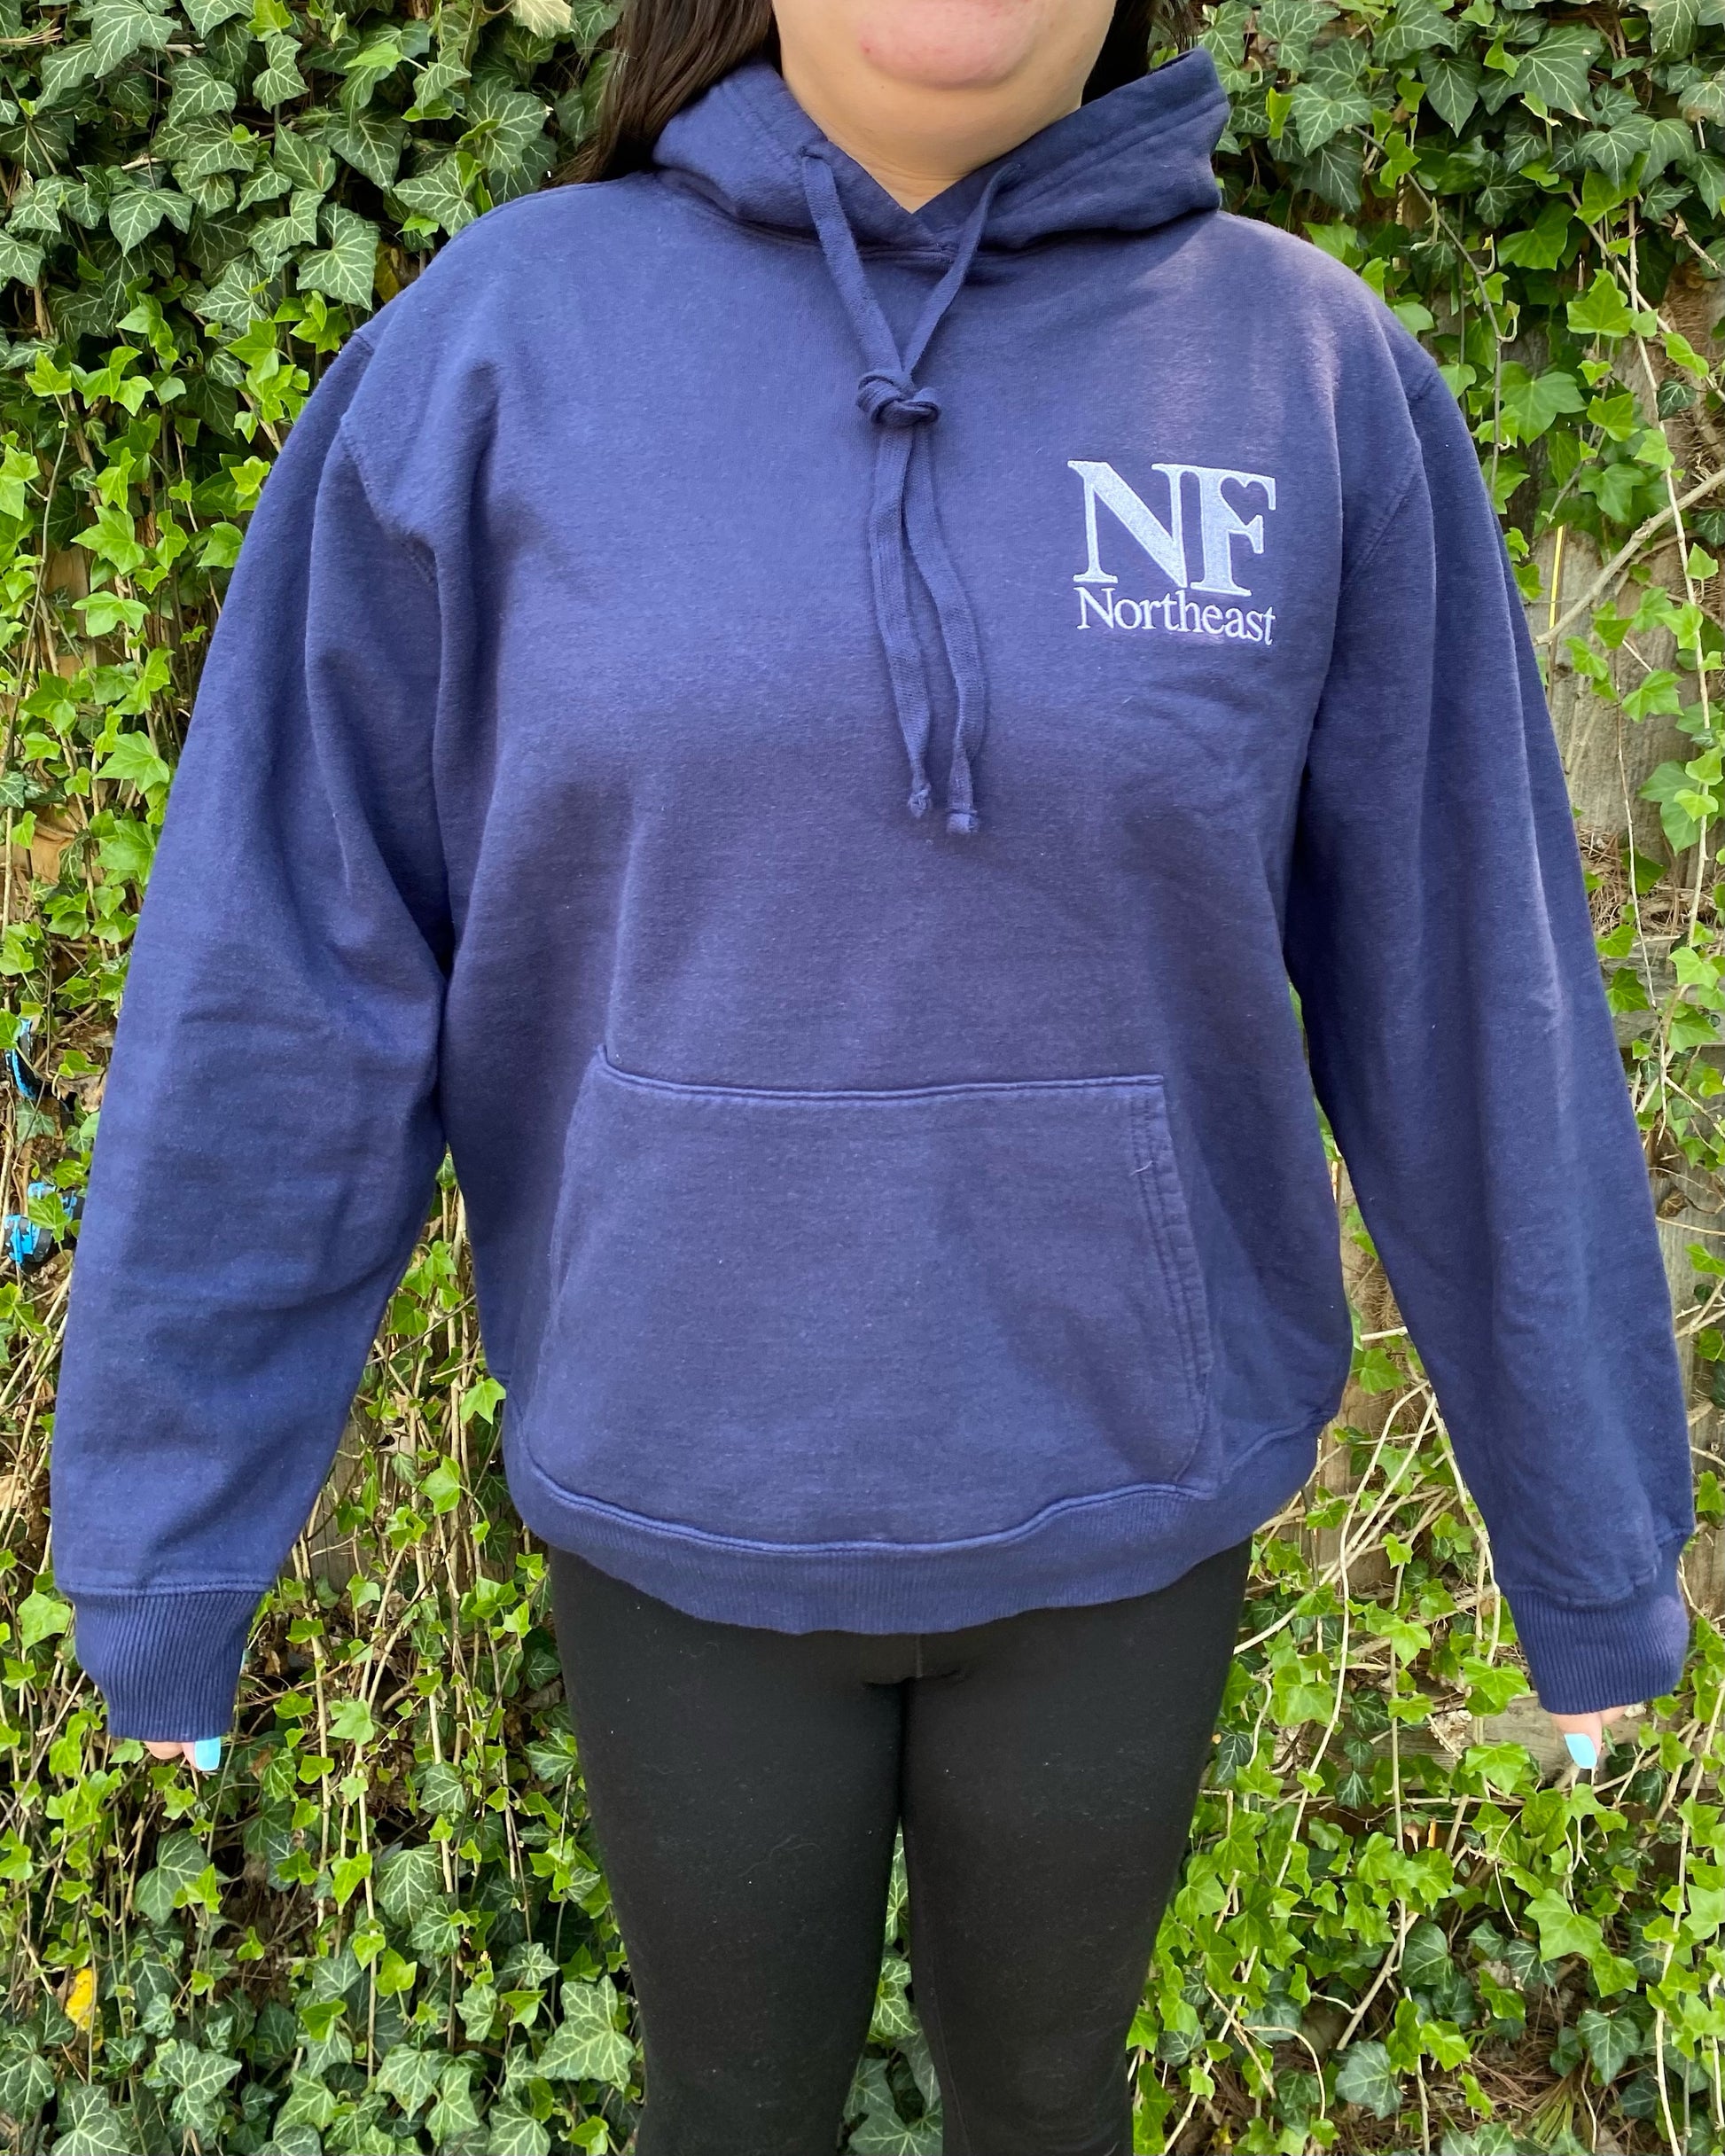 navy blue hoodie with front pocket on woman with NF Northeast logo embroidered on upper left chest